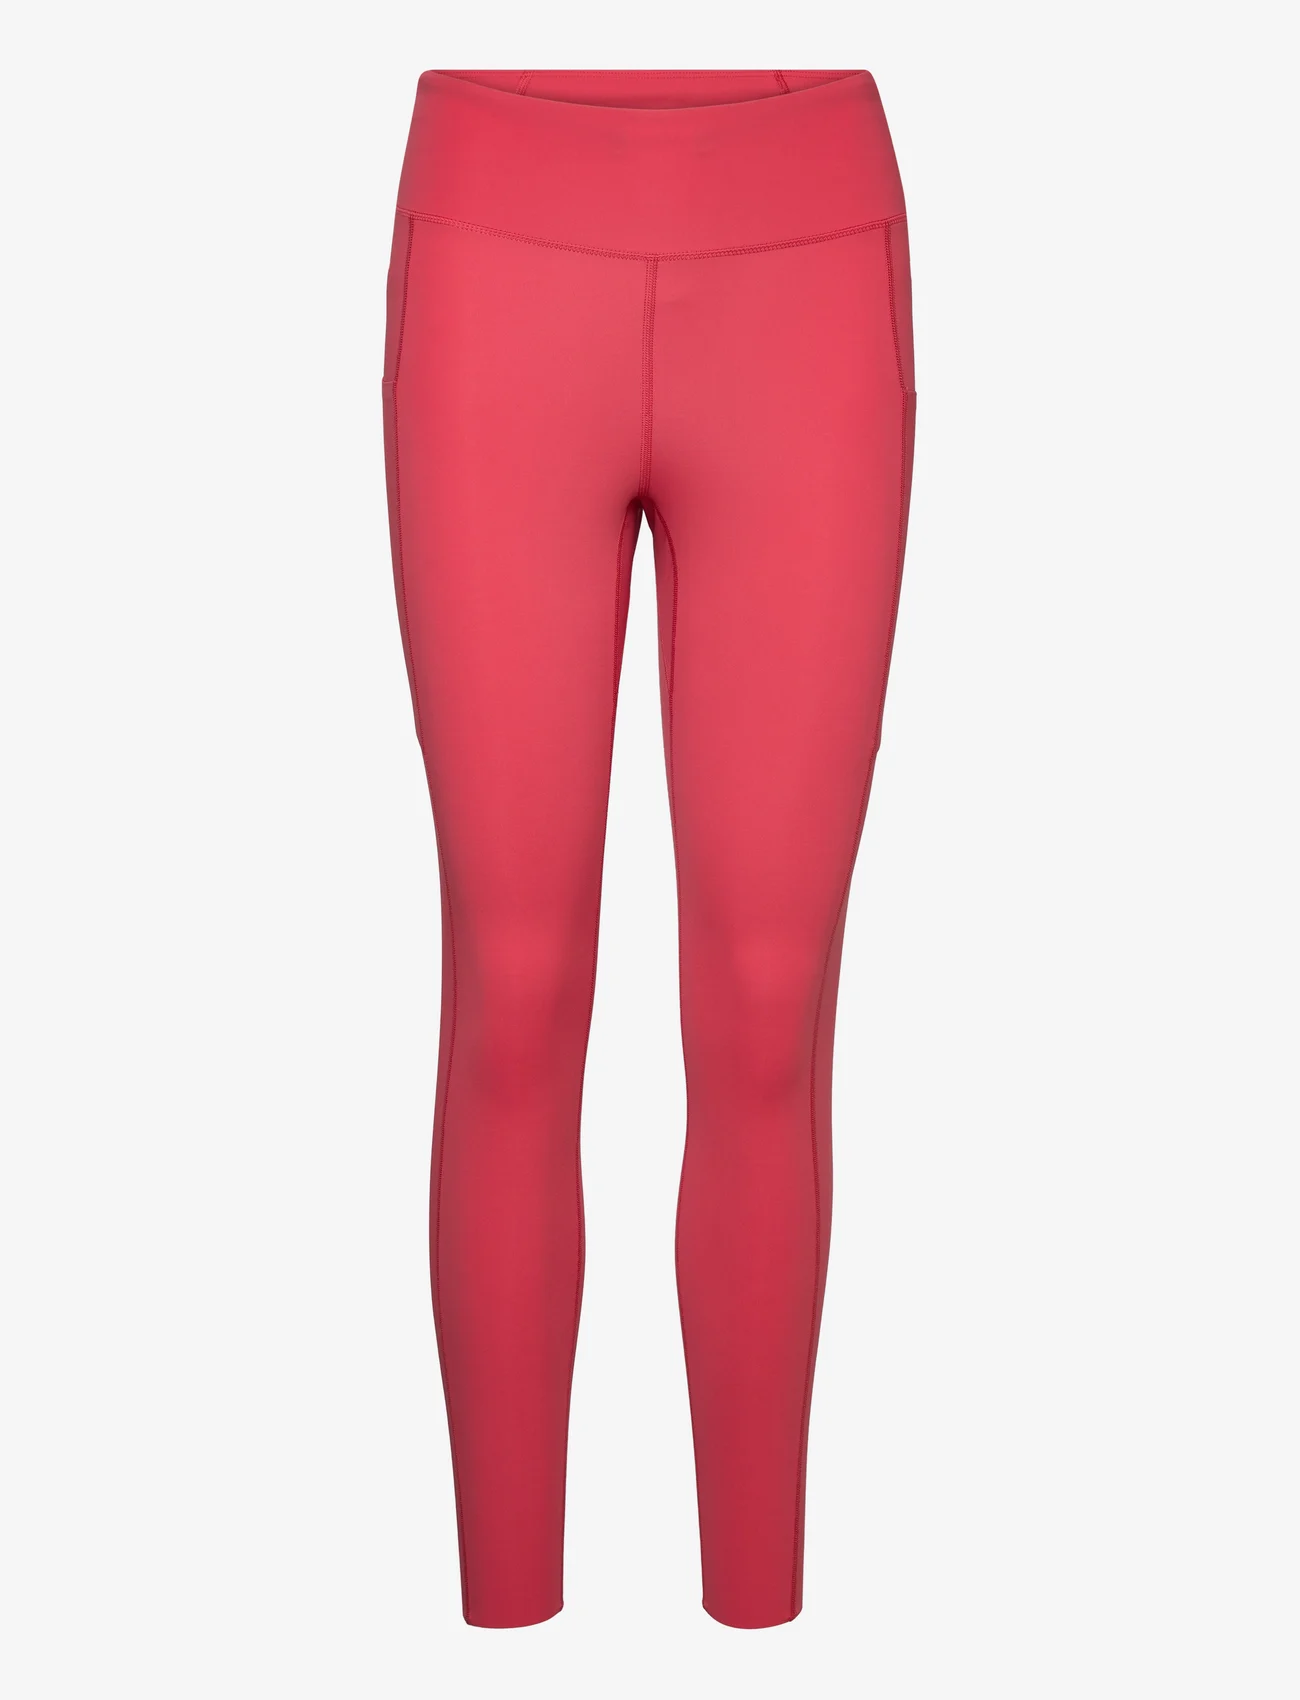 Peak Performance - W Power Tights-SOFTER RED - compression tights - softer red - 0